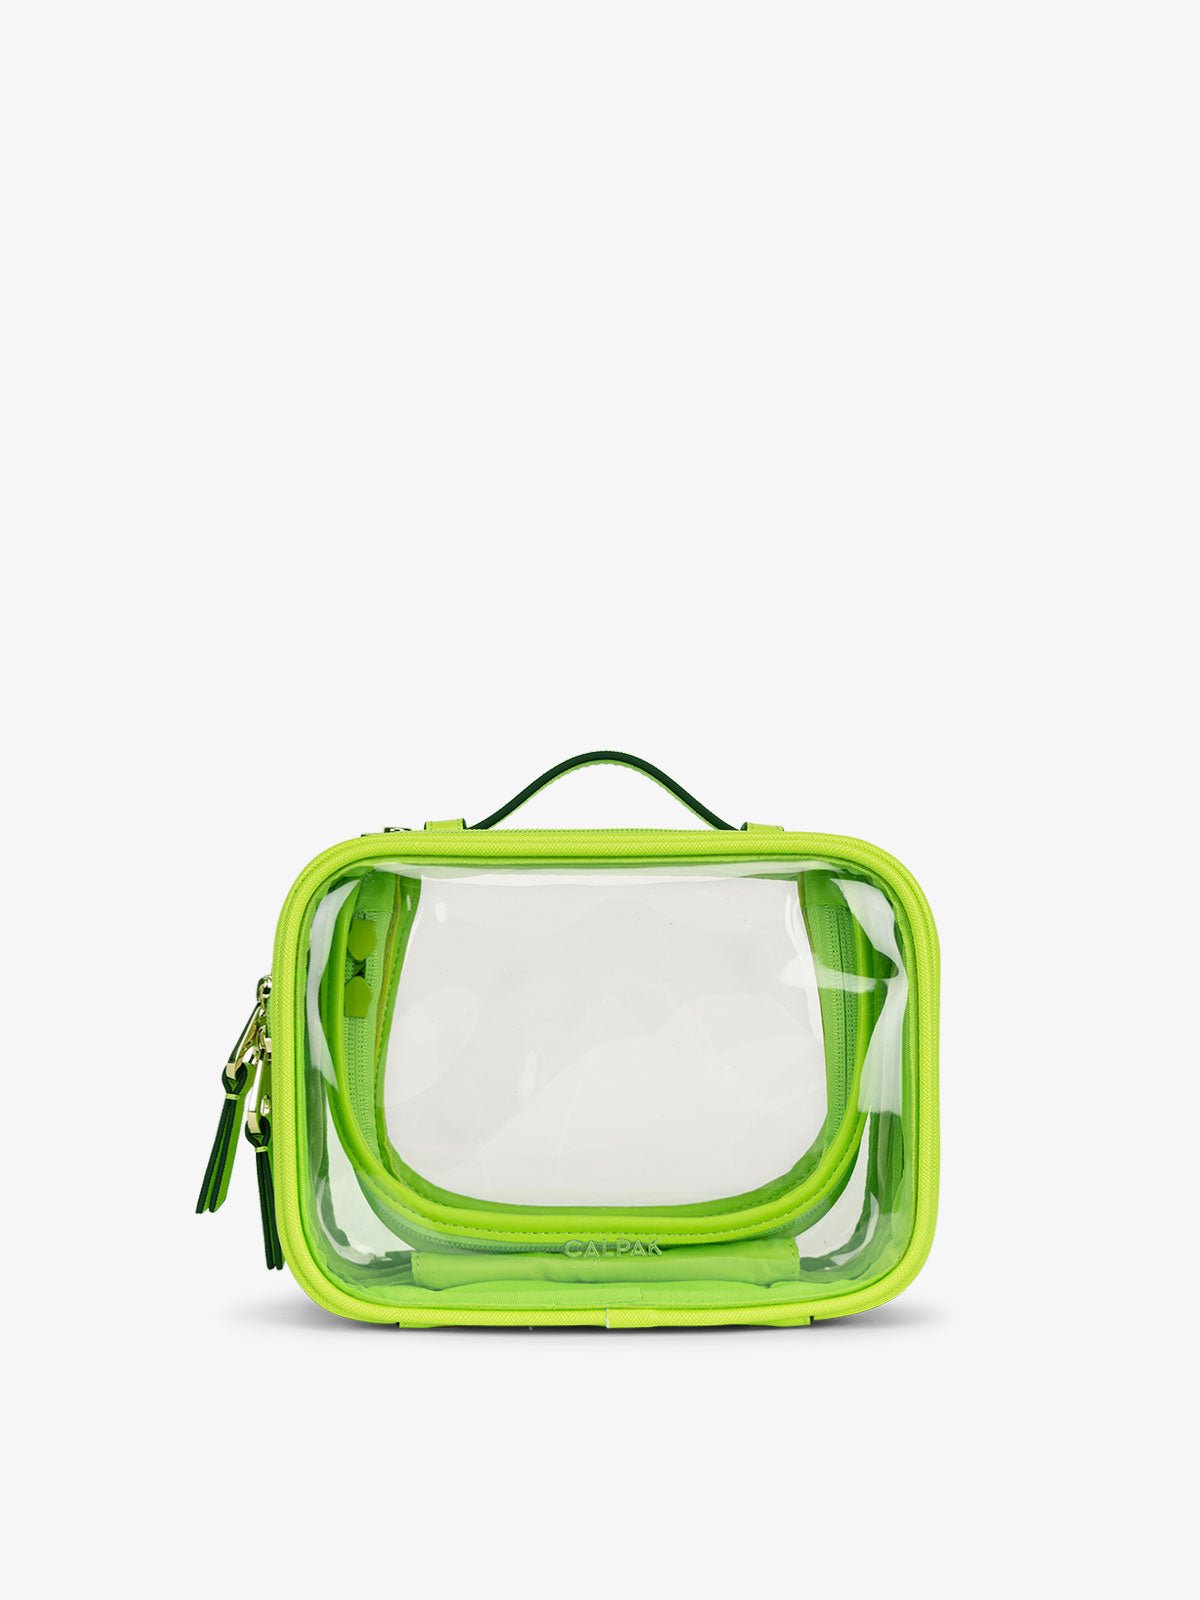 CALPAK small clear makeup bag with zippered compartments in electric green